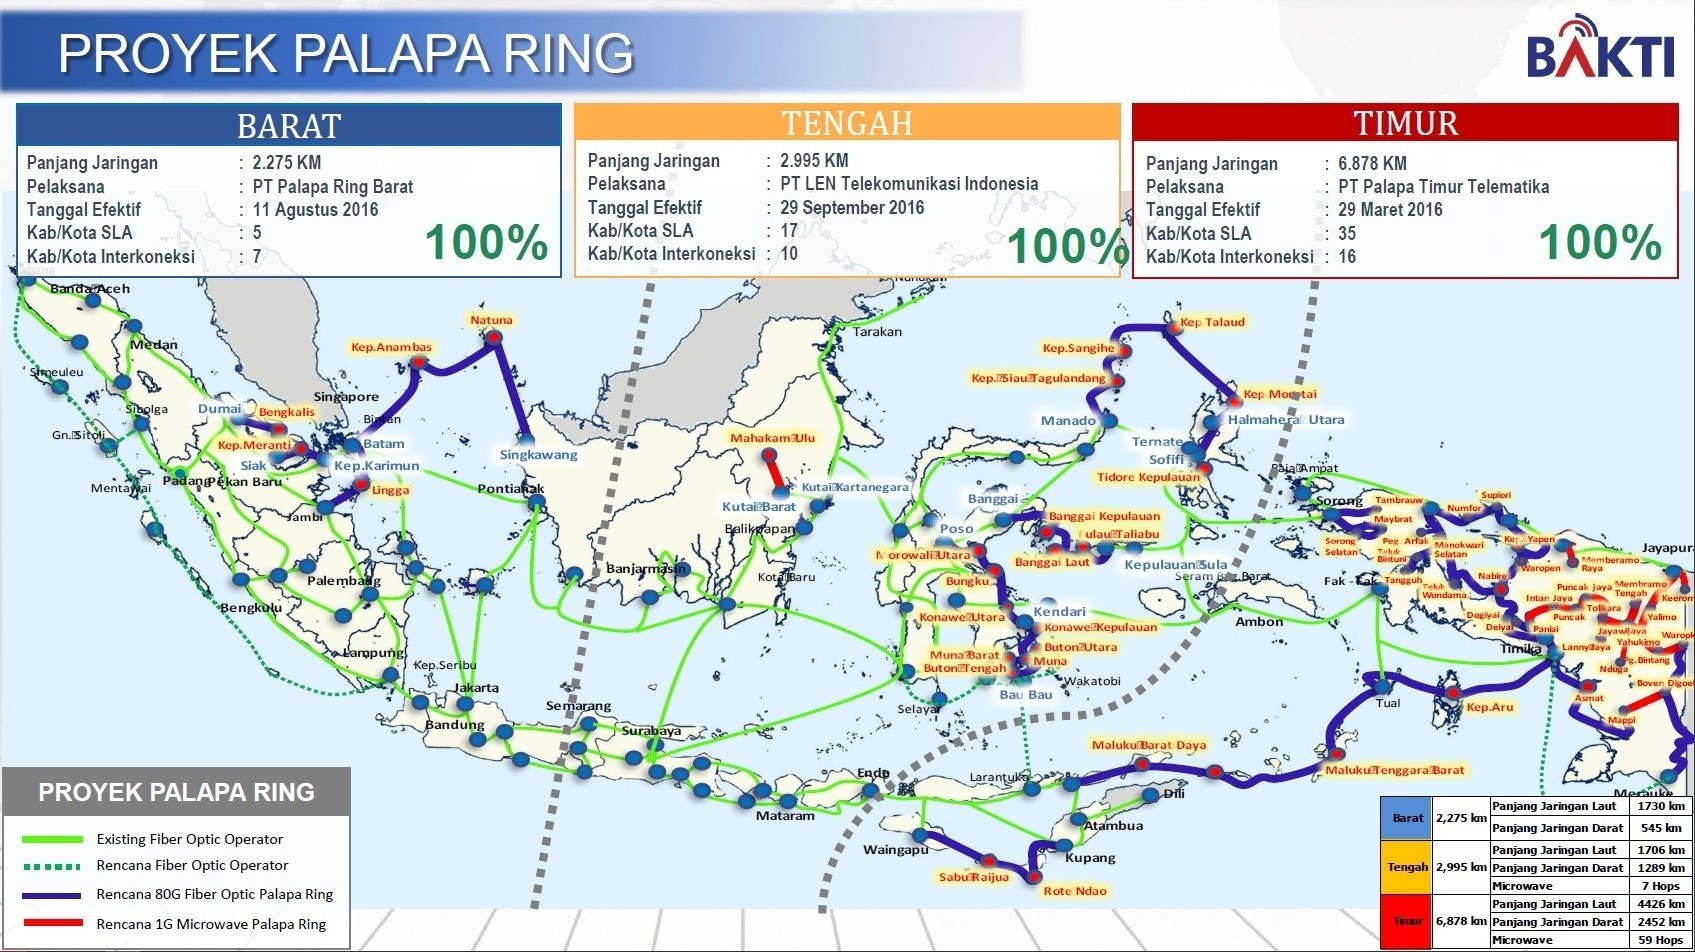 2021 submarine cable map